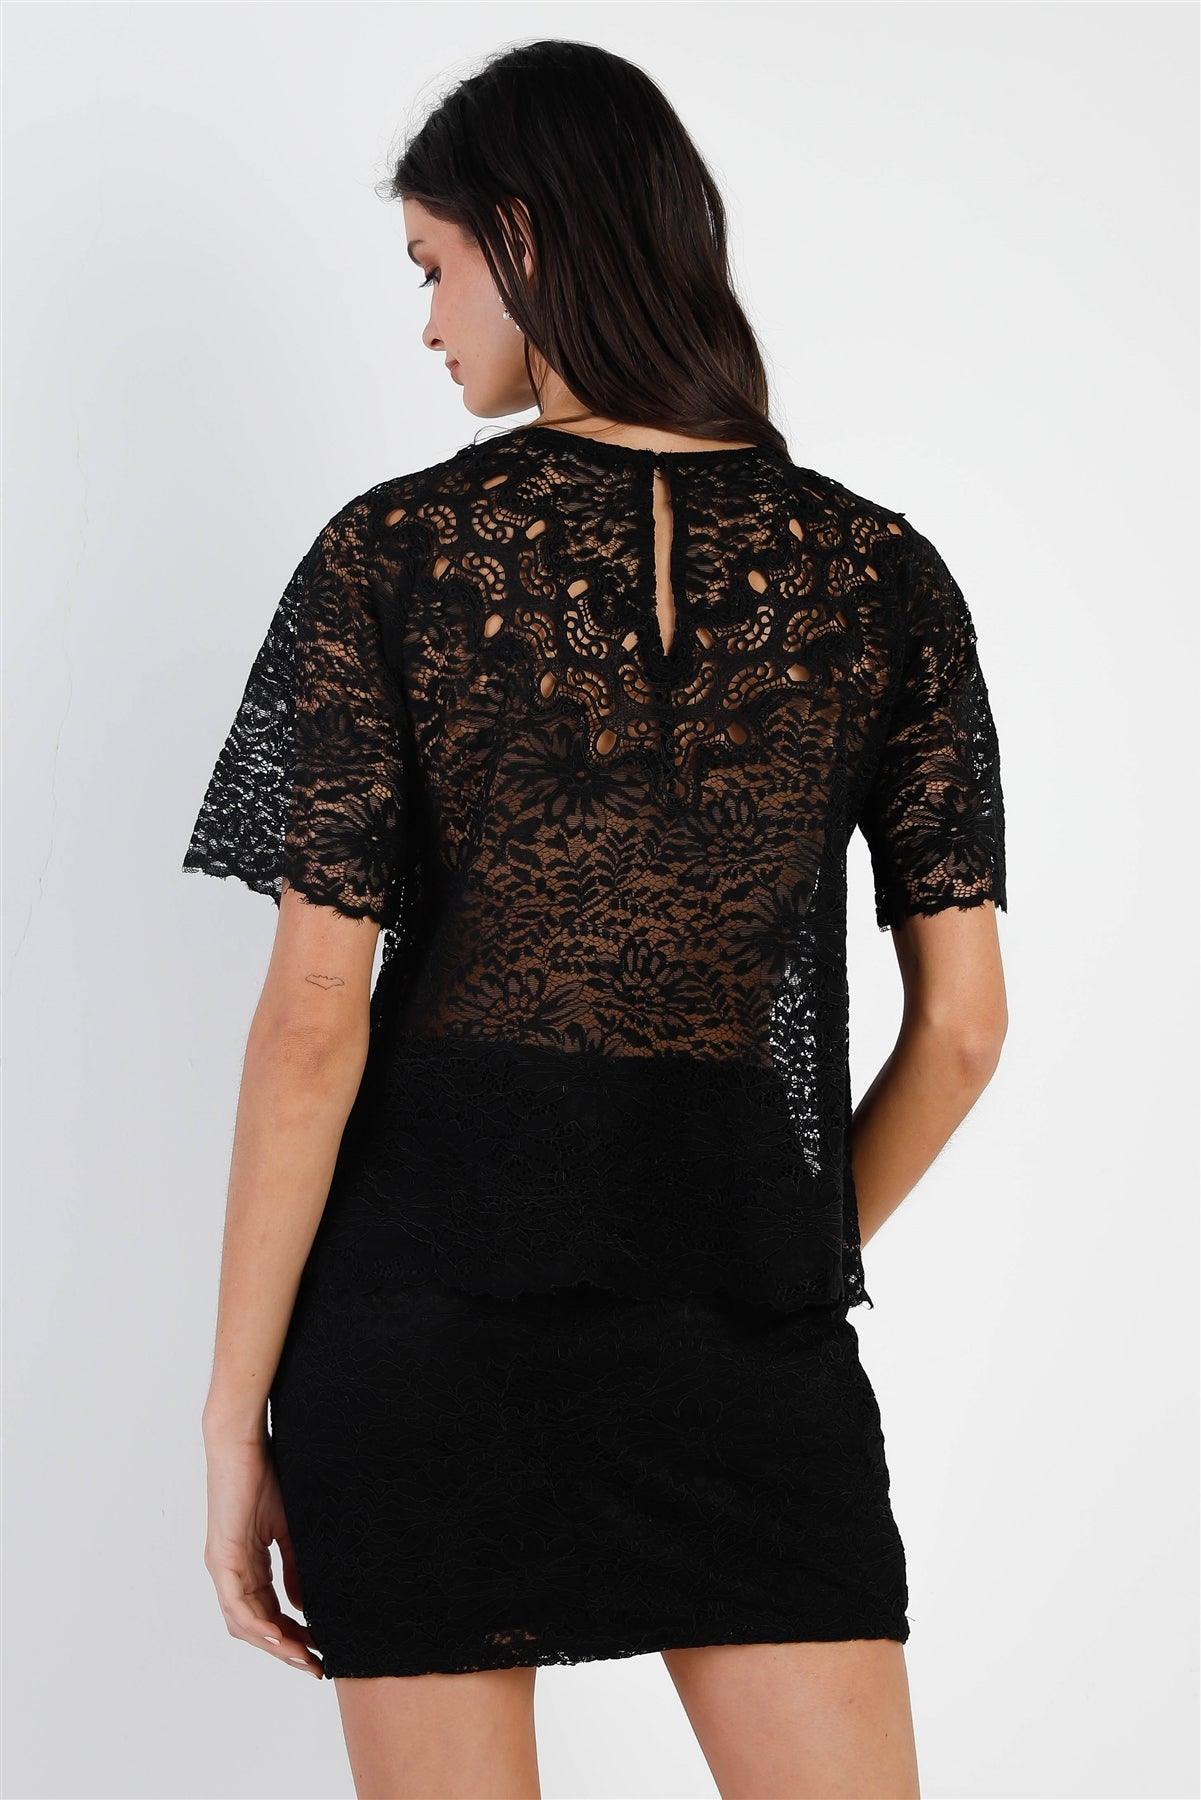 Black Lace Embroidery Detail Short Sleeve Semi-Sheer Top & Skirt Set /1-2-2-1